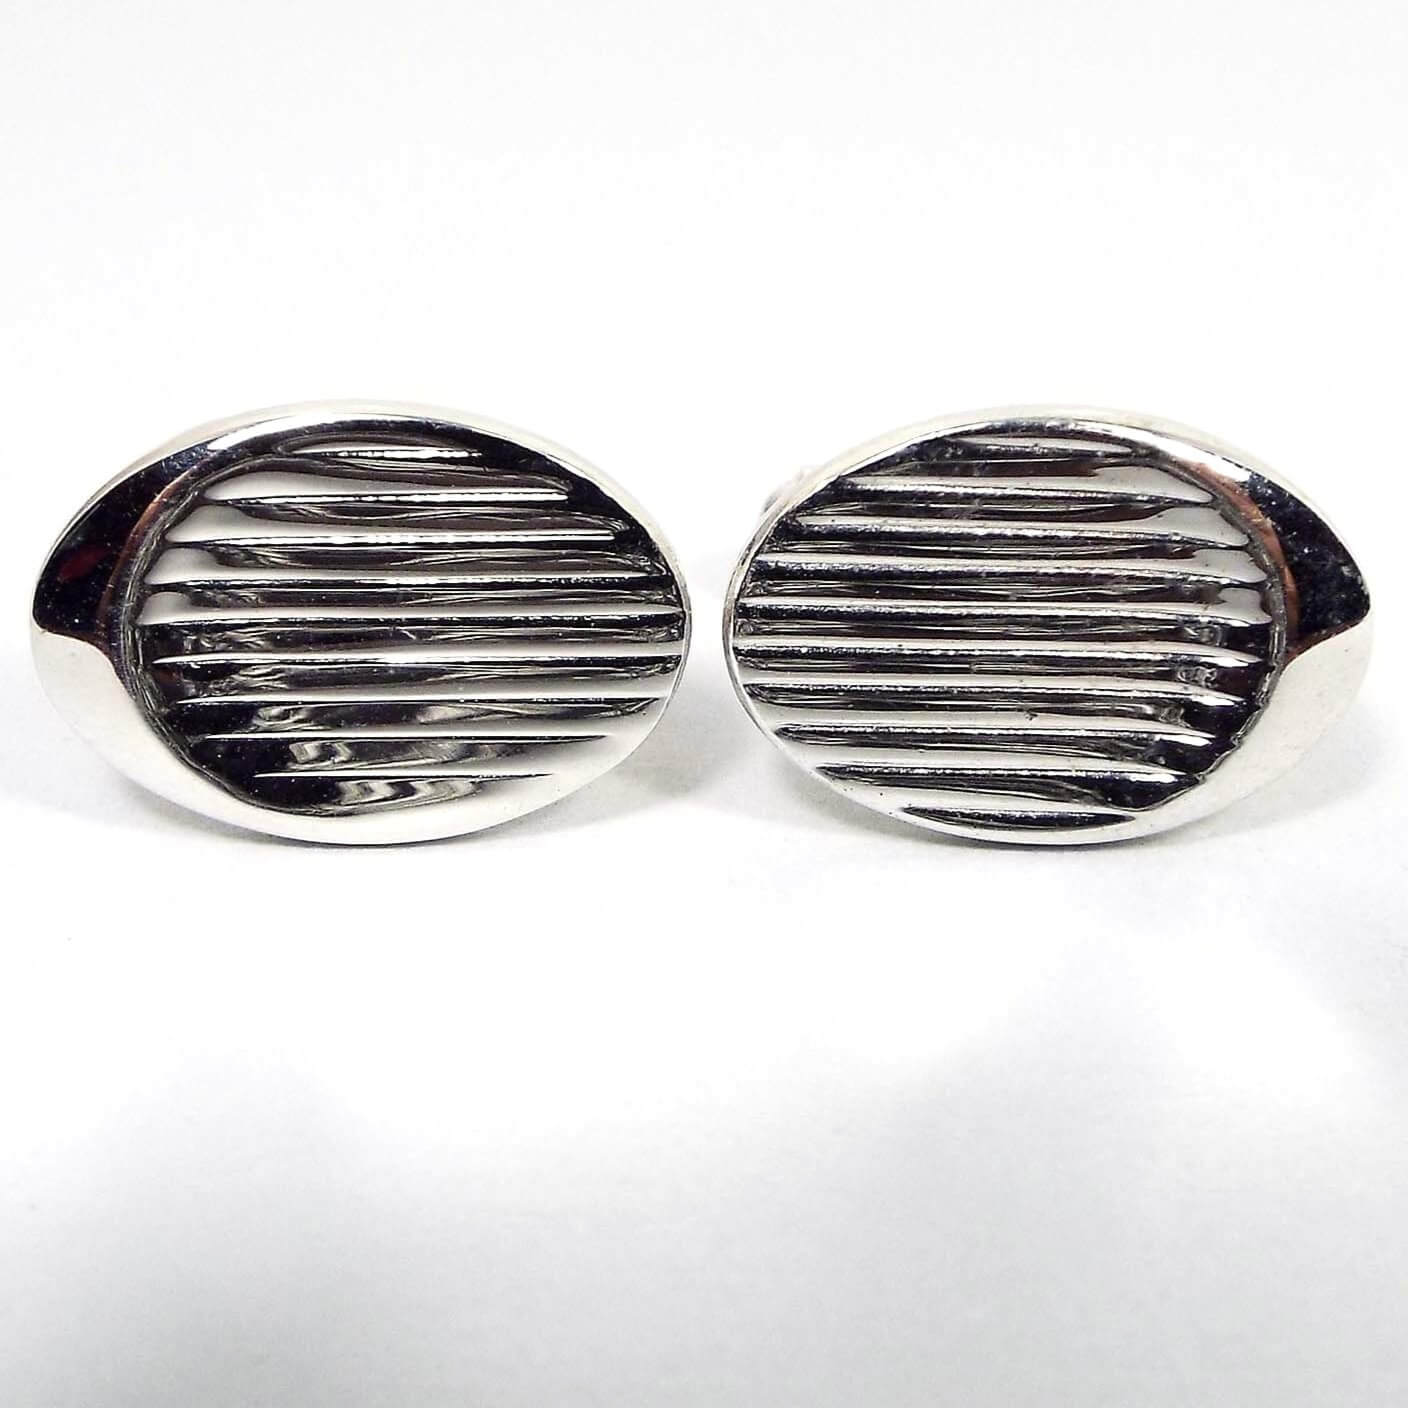 Front view of the Mid Century vintage Modernist style Emmons cufflinks. They are oval in shape and have a line design. The shiny silver color metal is picking up dark reflections from the background.